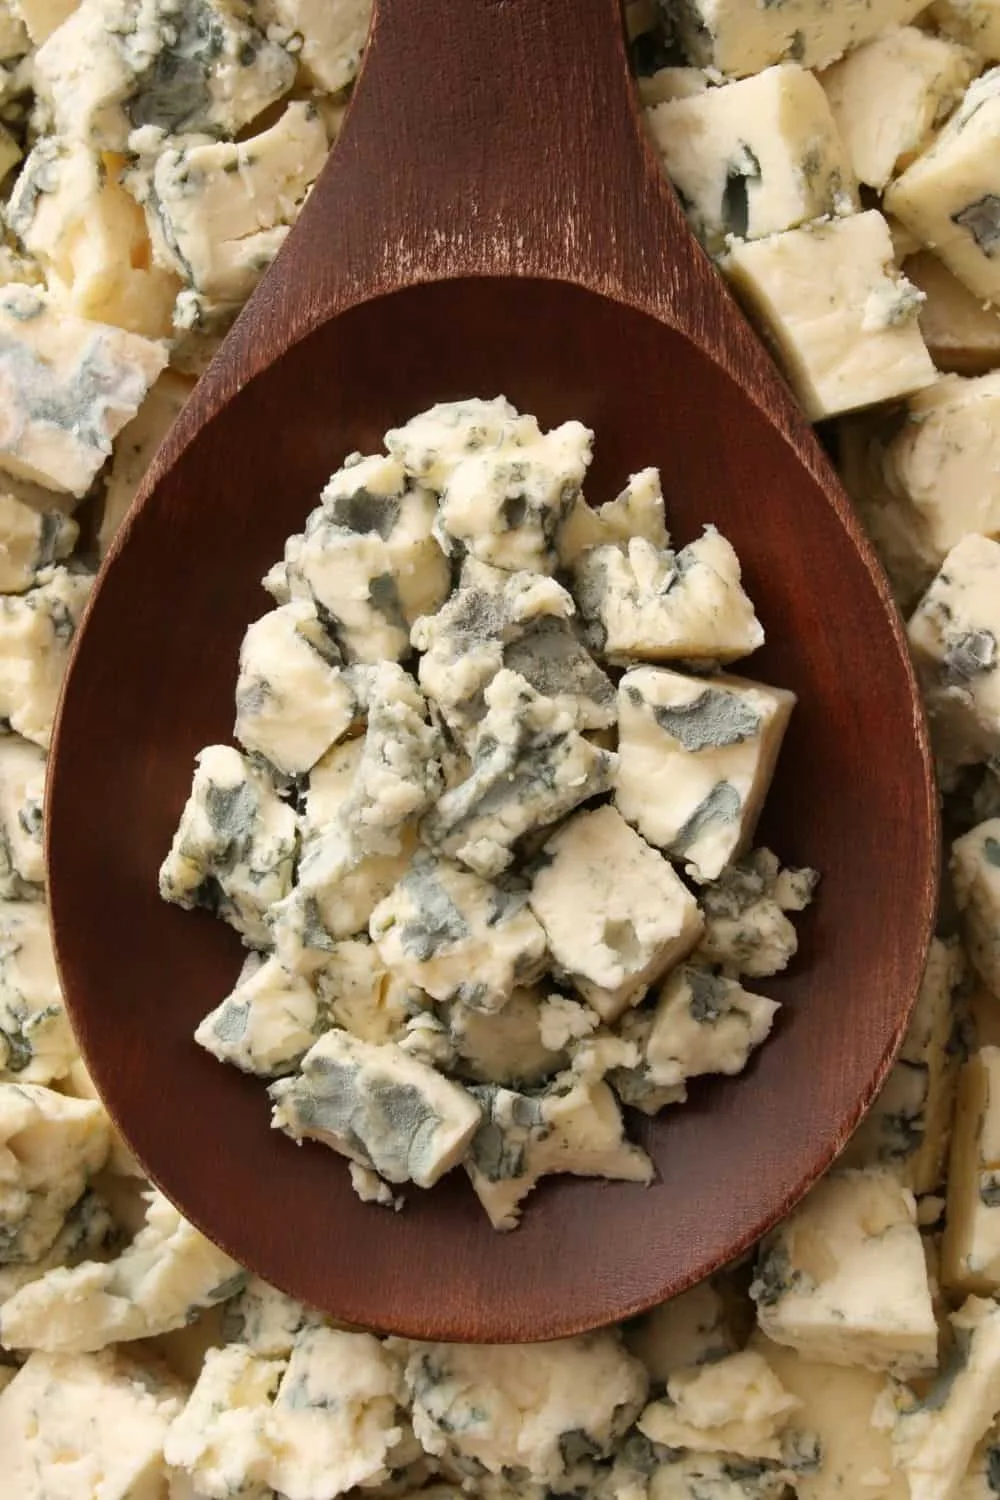 Does blue cheese go bad if not refrigerated